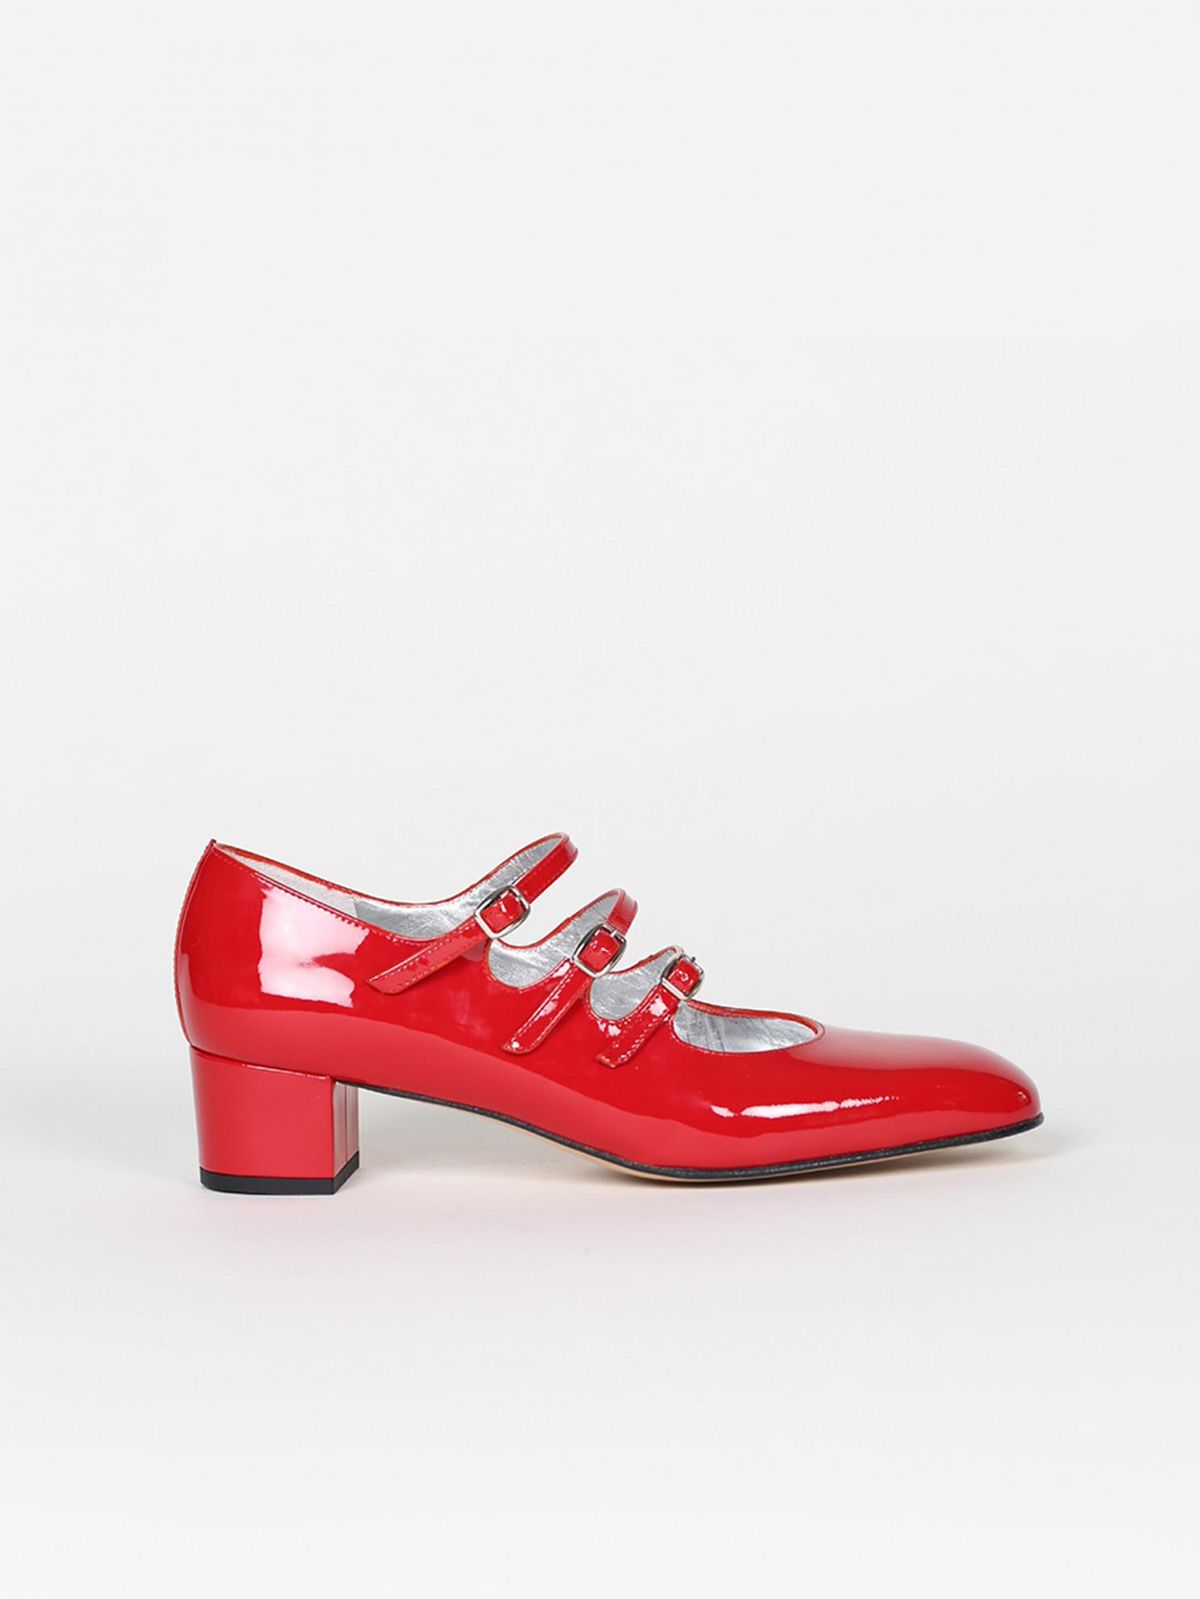 carel paris red patent leather mary janes